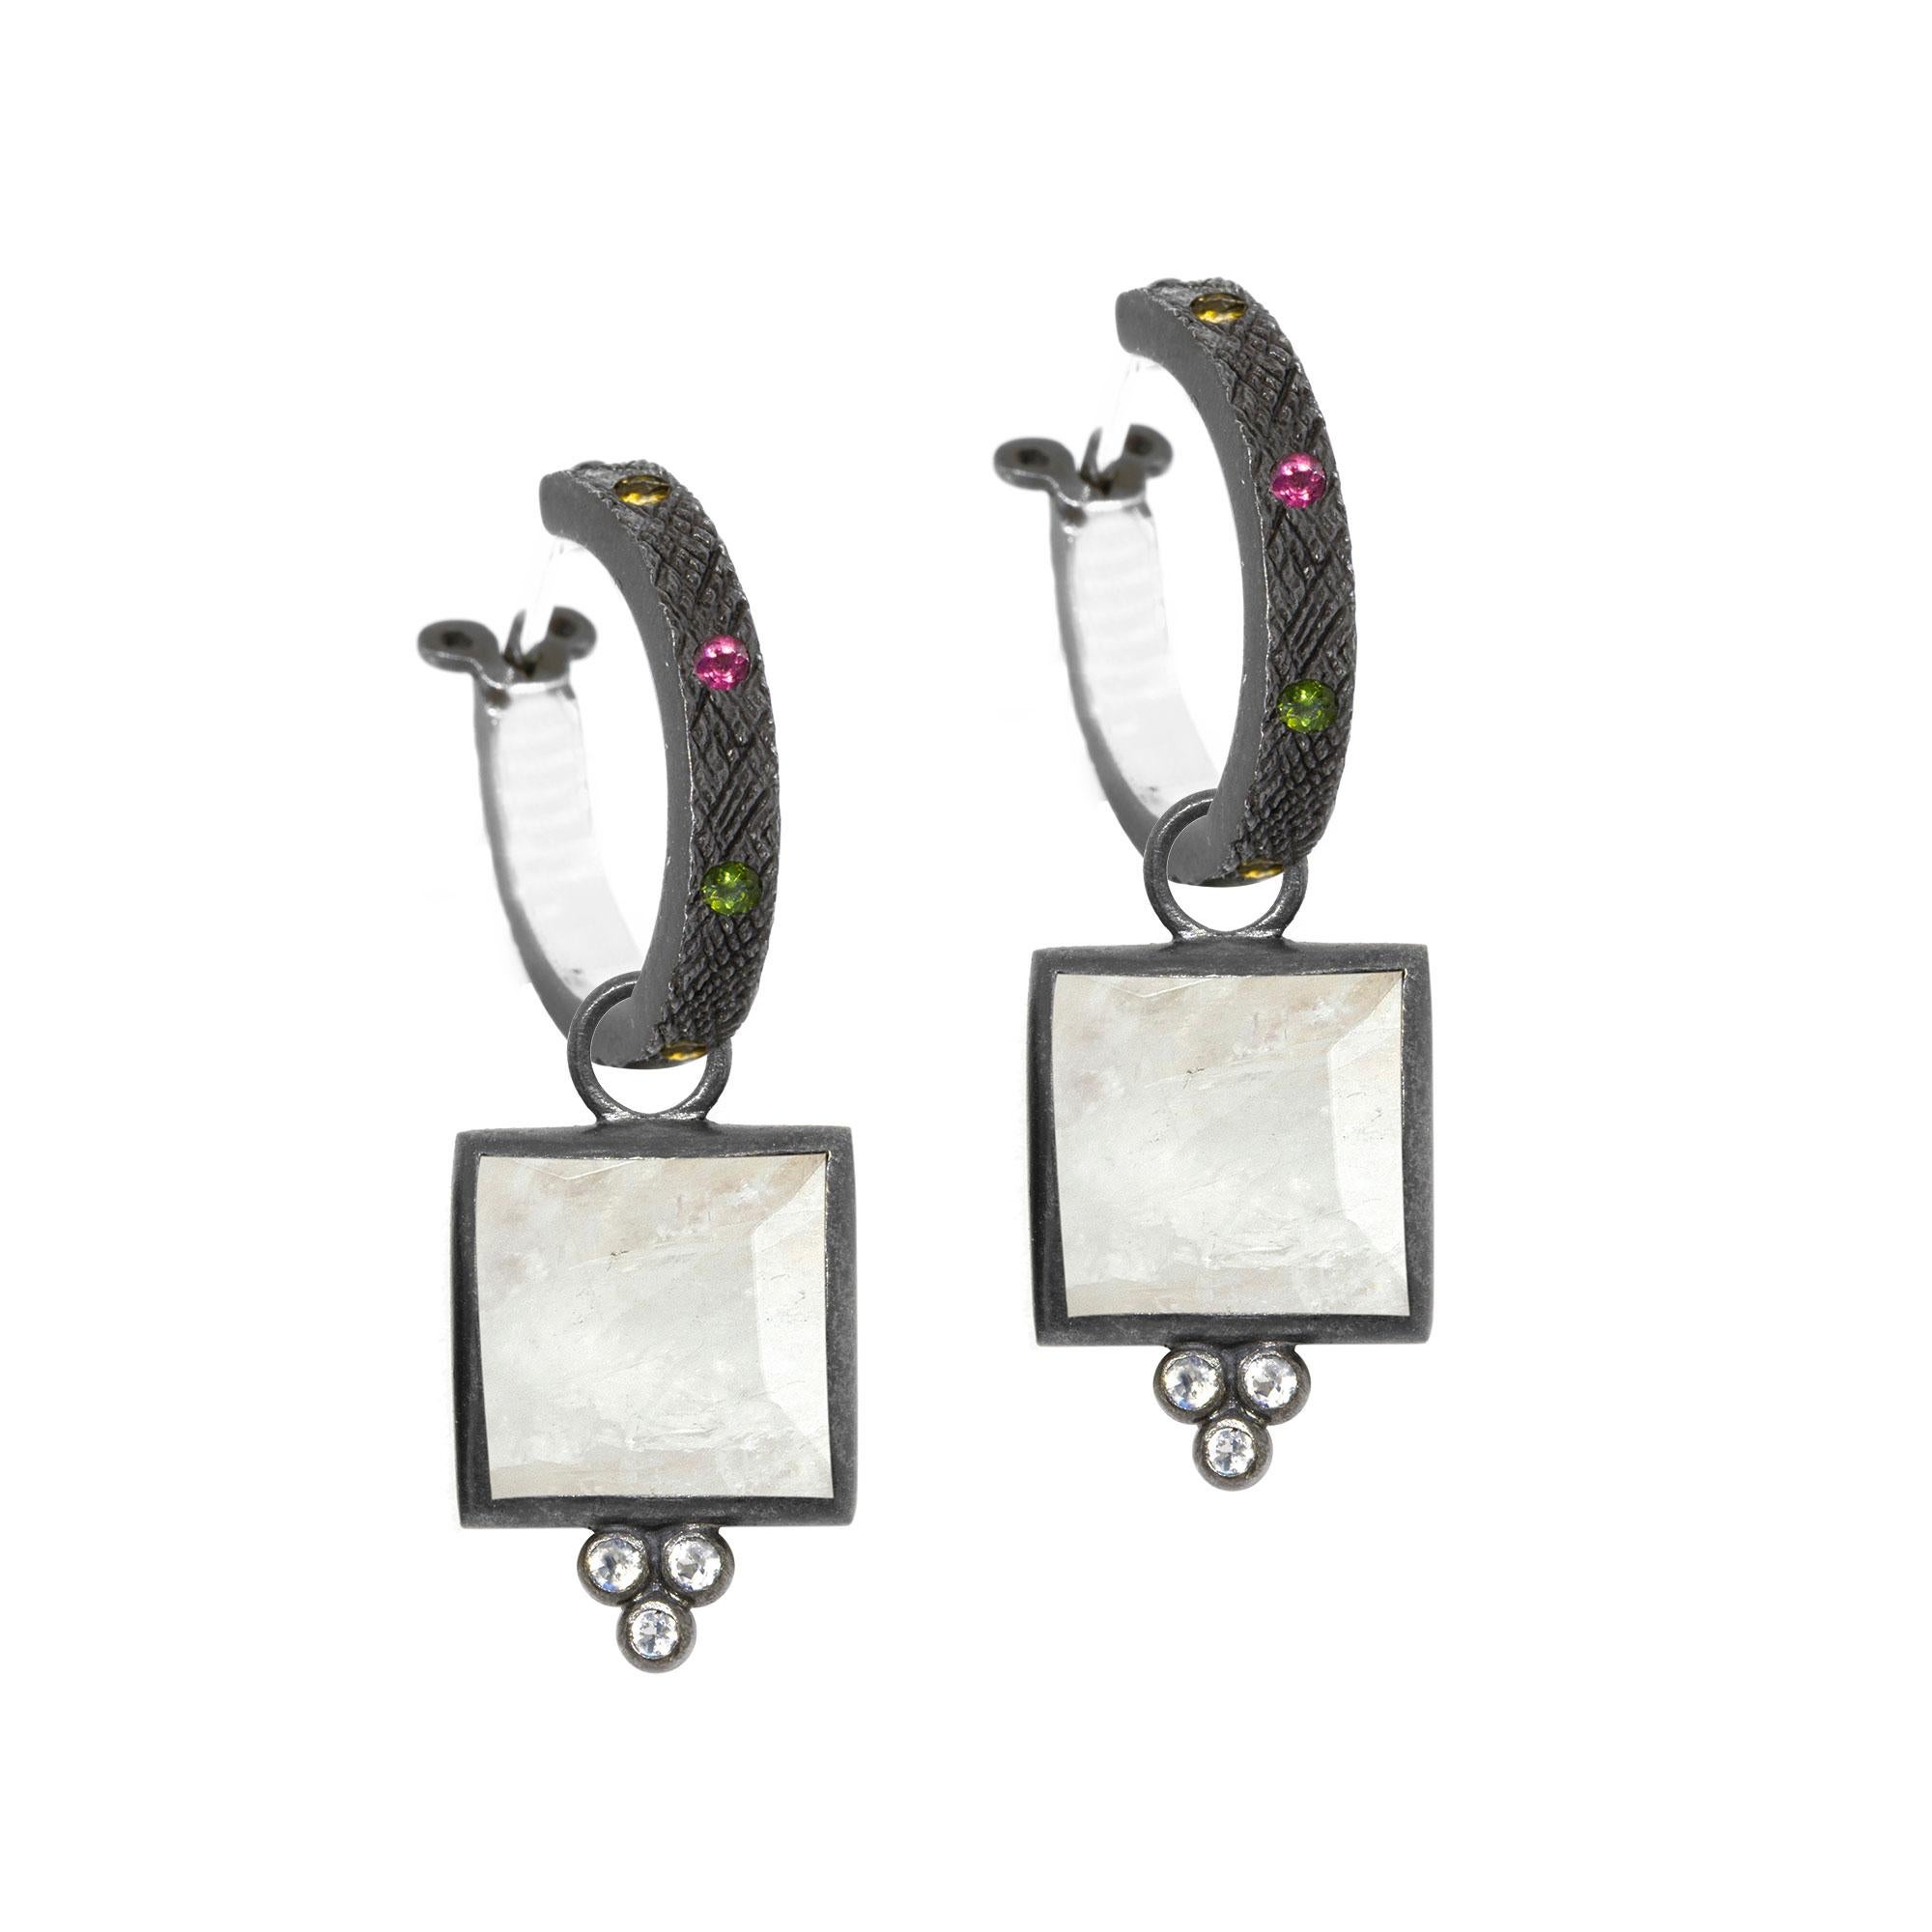 Square dance: Designed with hand-faceted moonstone framed in a textured blackened silver, our diamond-accented Ariana Oxidized Charms pair with any of our hoops and mix well with other styles.
Nina Nguyen Design's patent-pending earrings have an